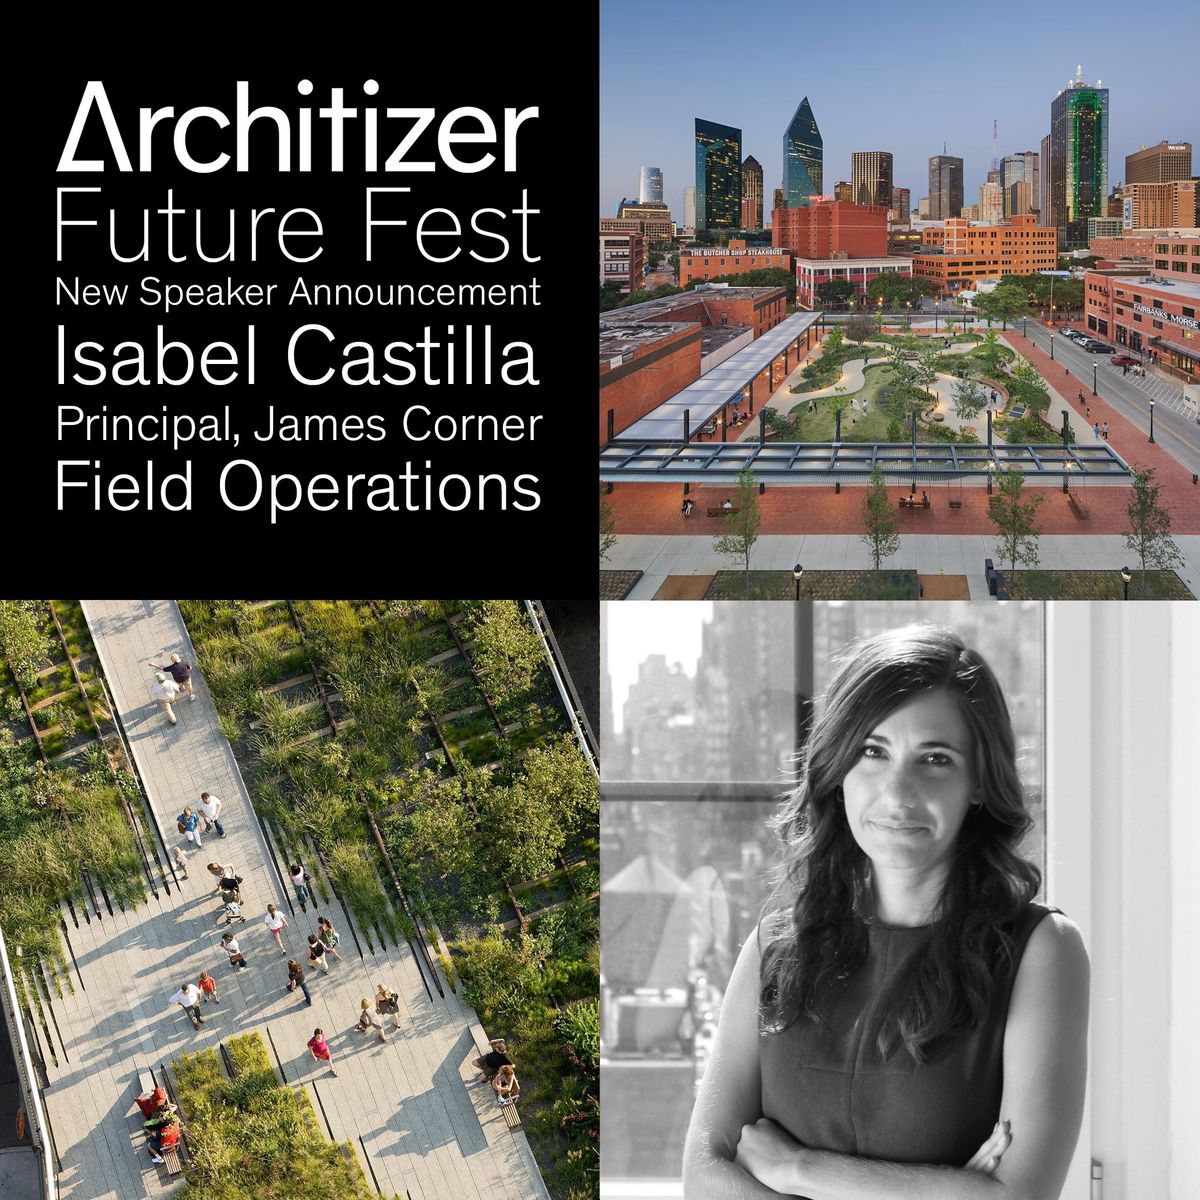 ***Future Fest: New Speaker Announcement*** . Architizer is thrilled to announce that Isabel Castilla of James Corner @fieldoperations will speak at #ArchitizerFutureFest this September! . Register for free to attend Isabel's live talk this fall: arc.ht/3NFkutQ